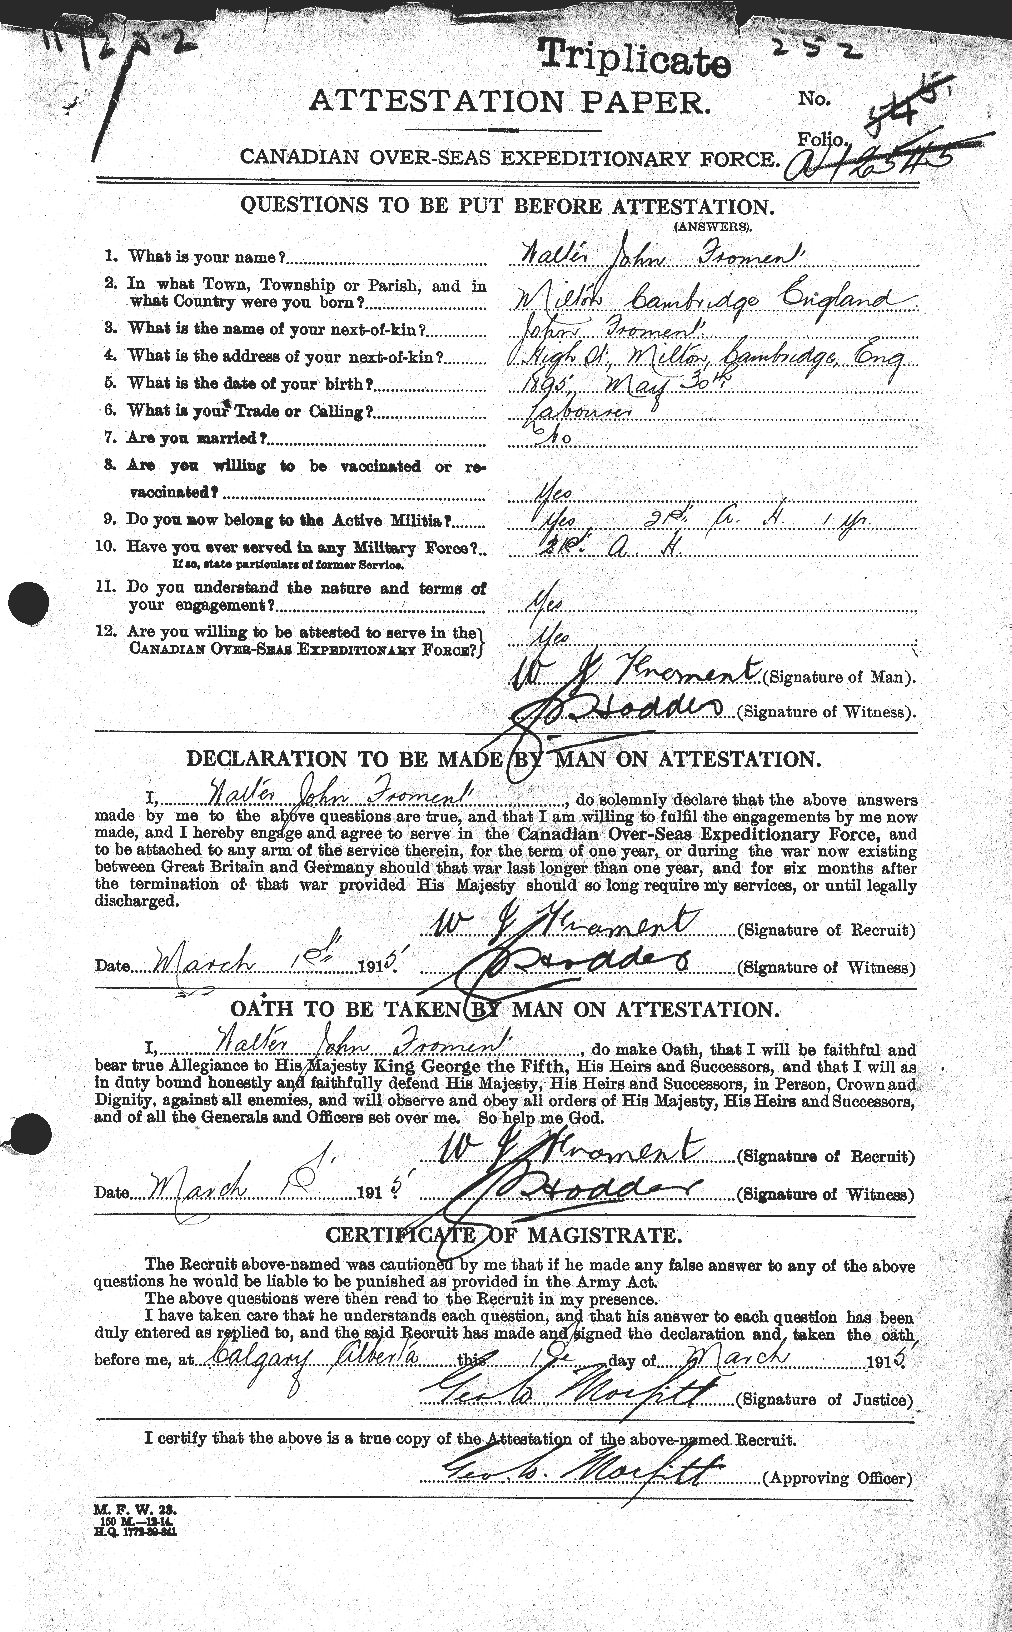 Personnel Records of the First World War - CEF 337629a